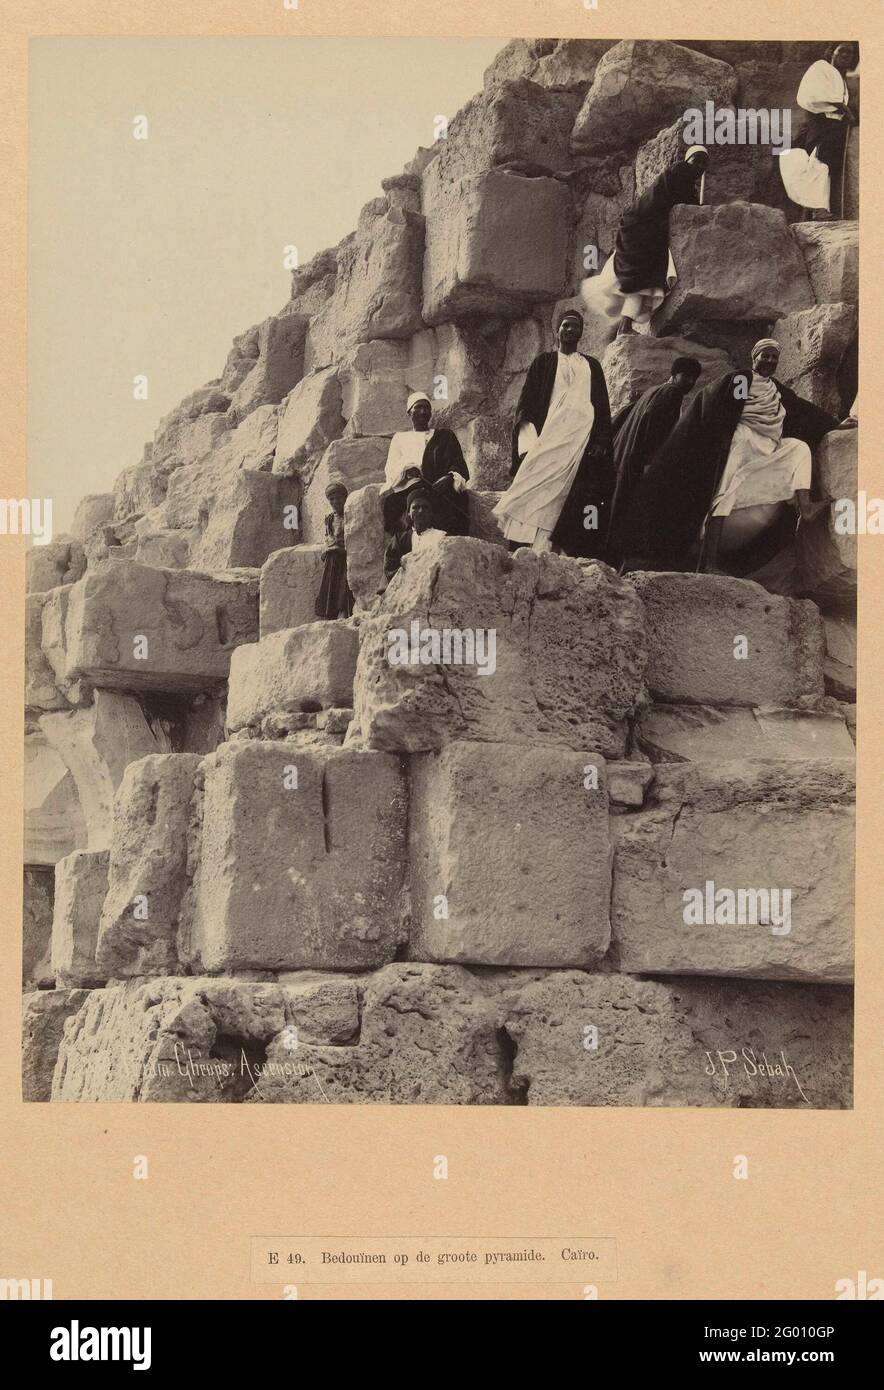 A group of men climb the pyramid of cheops.; EE 49. Bedouines on the large pyramid. Cairo; Egypt; 230 Pyram. Cheops Ascension. The photo is part of the photo series from Egypt collected by Richard Polak. Stock Photo